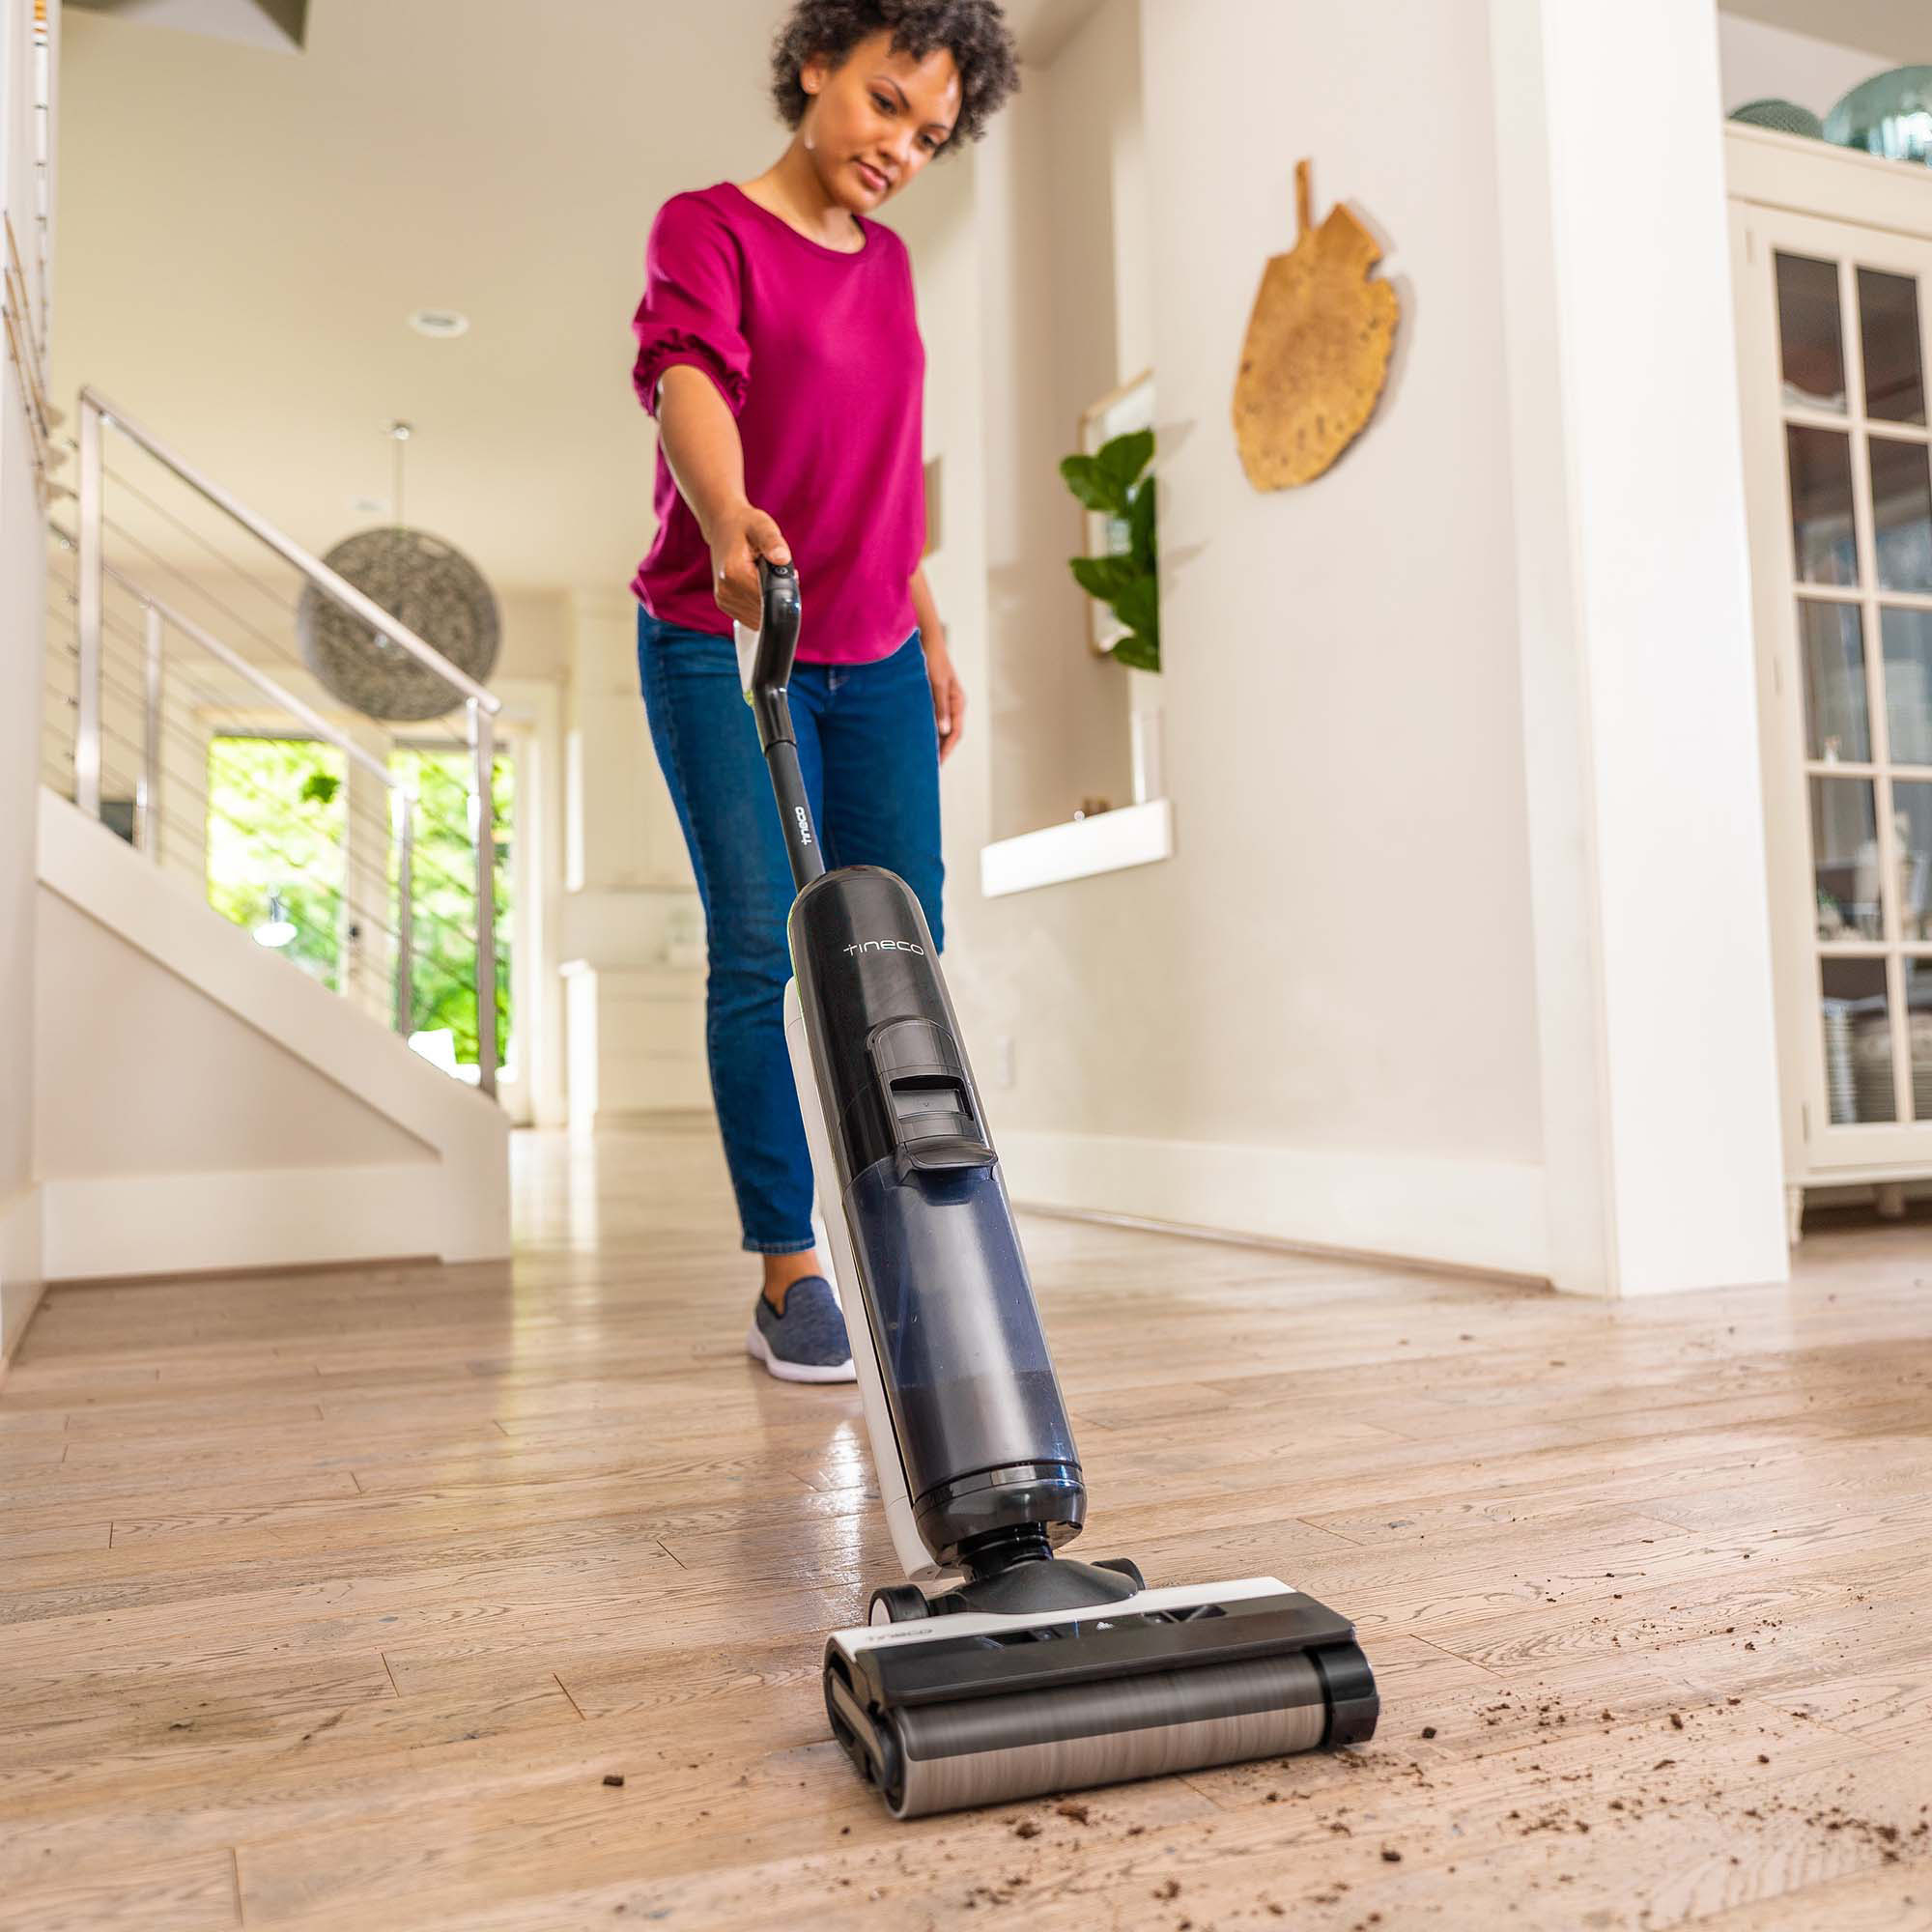 Tineco's new Floor Washers cut cleaning and mopping time in half